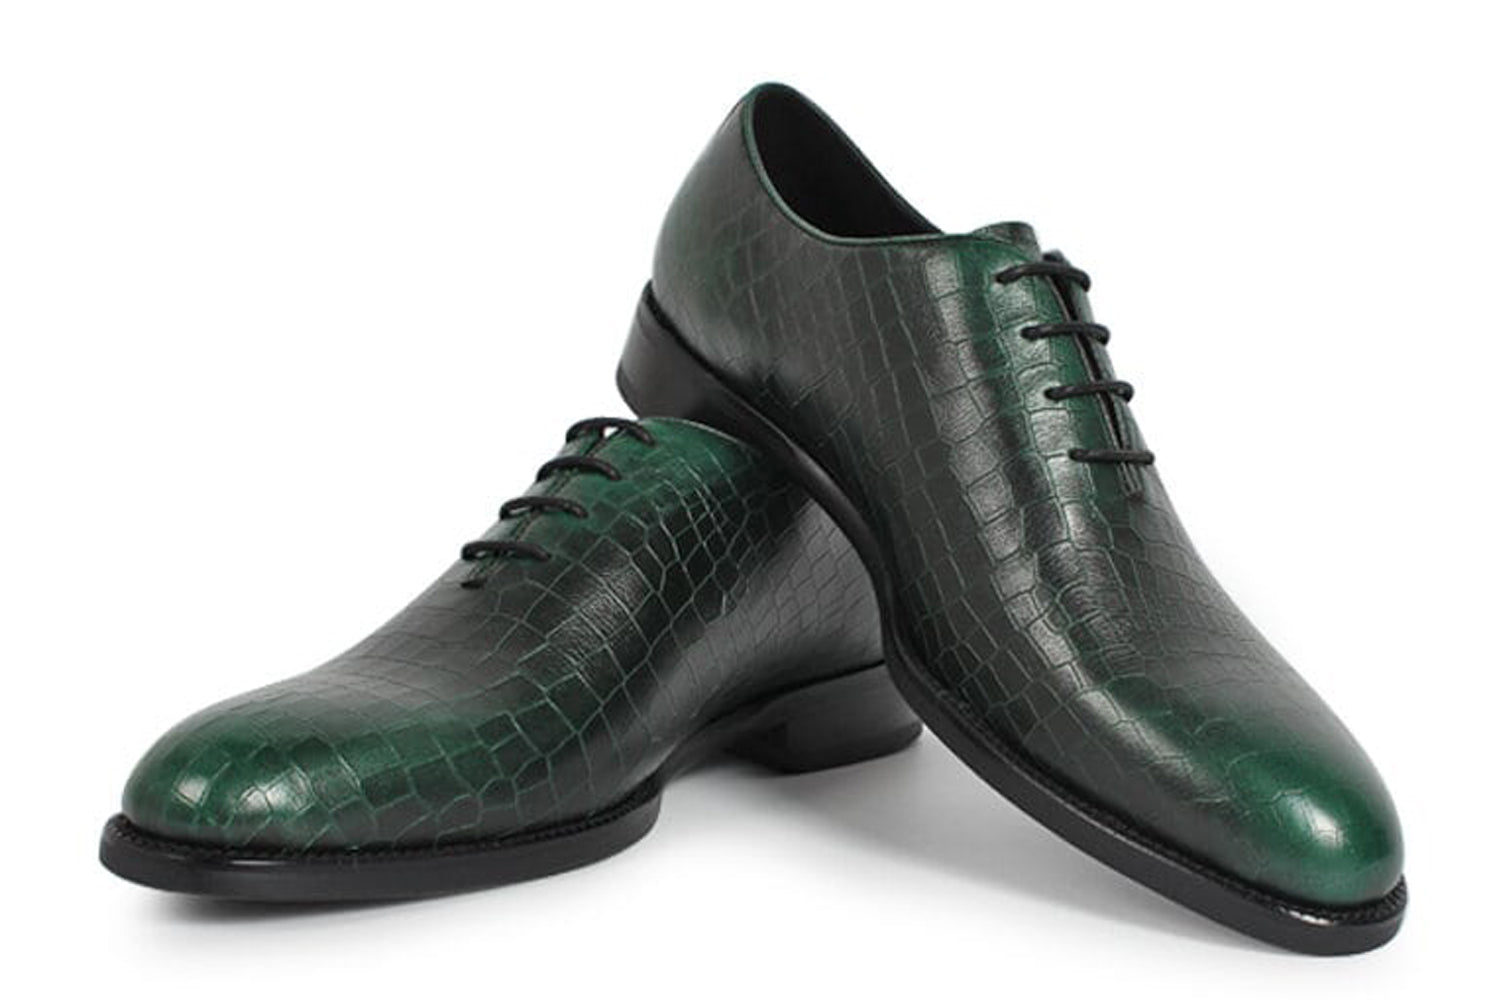 Green Croco Print Leather Formal Wholecut Oxford Lace Up Shoes for Men. Manmade Comfortable Sole. Customization Available.